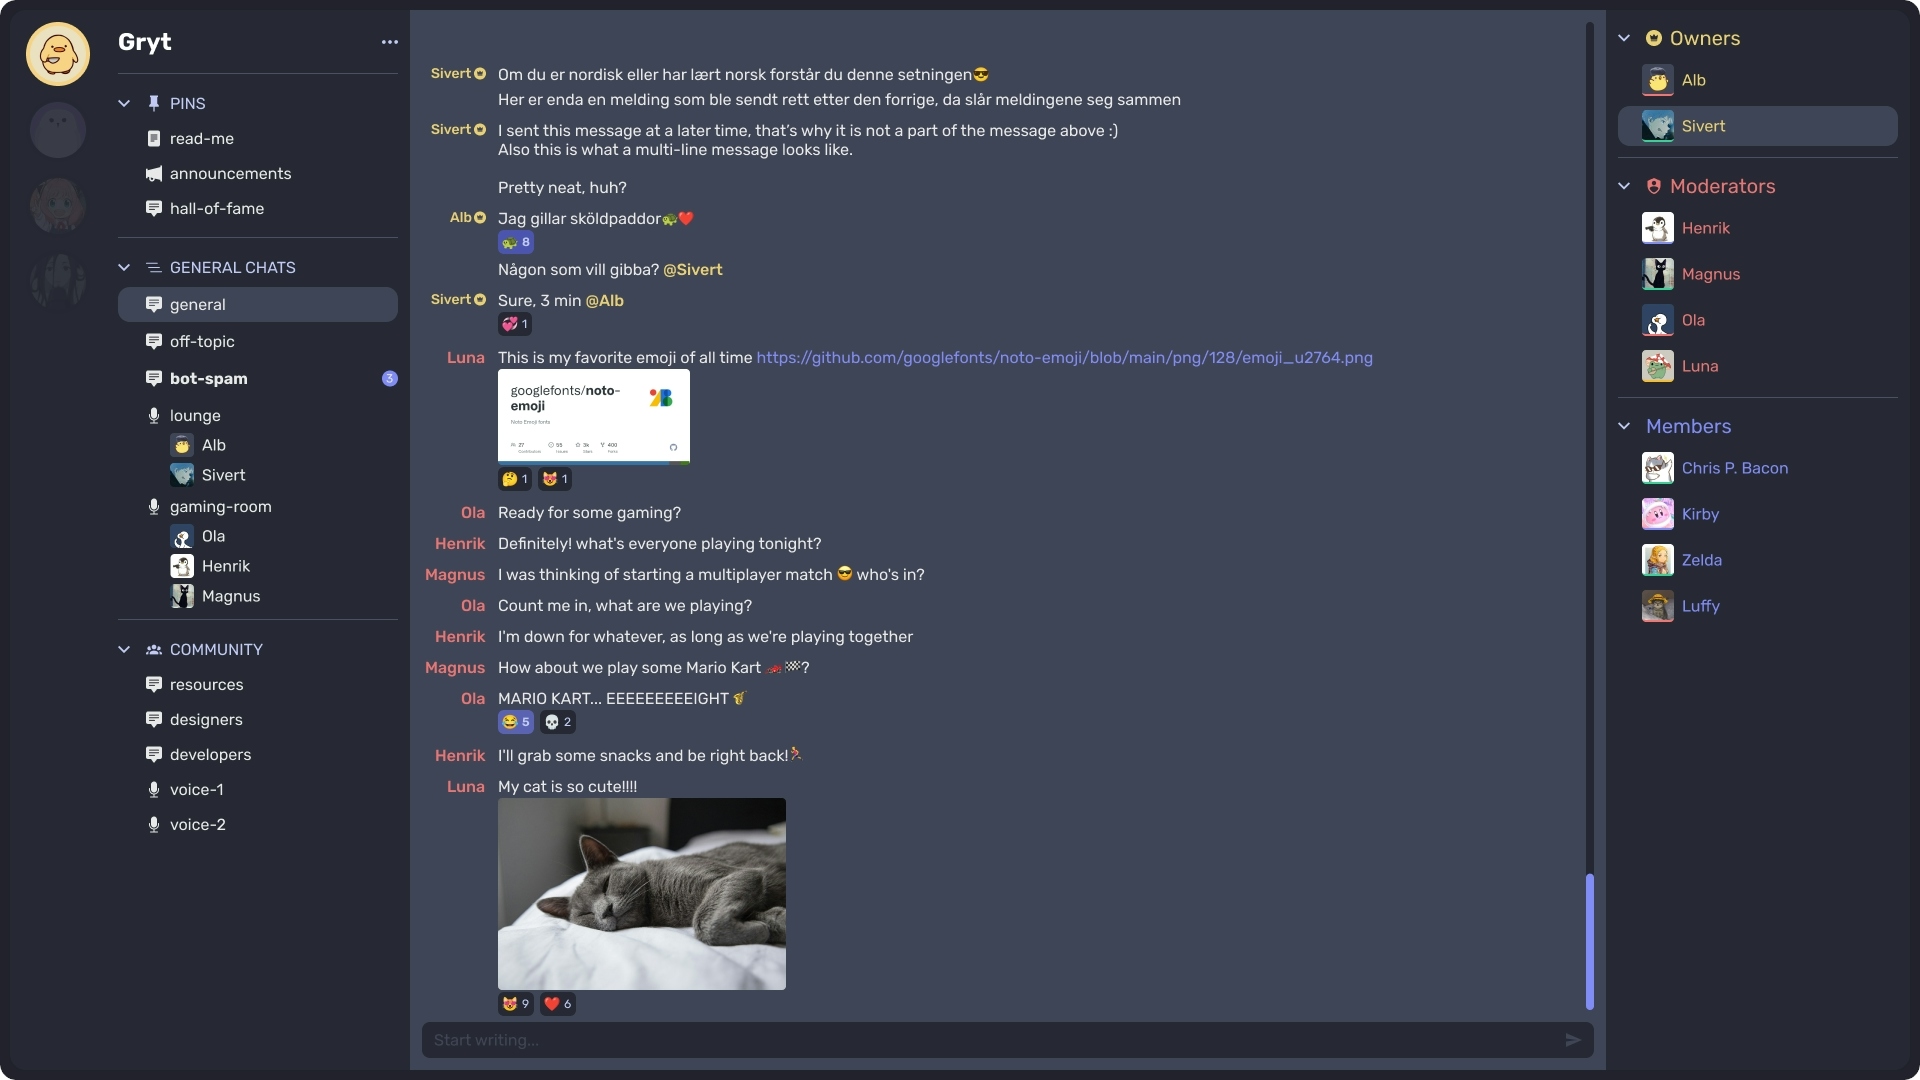 An early mockup of the Gryt chat client